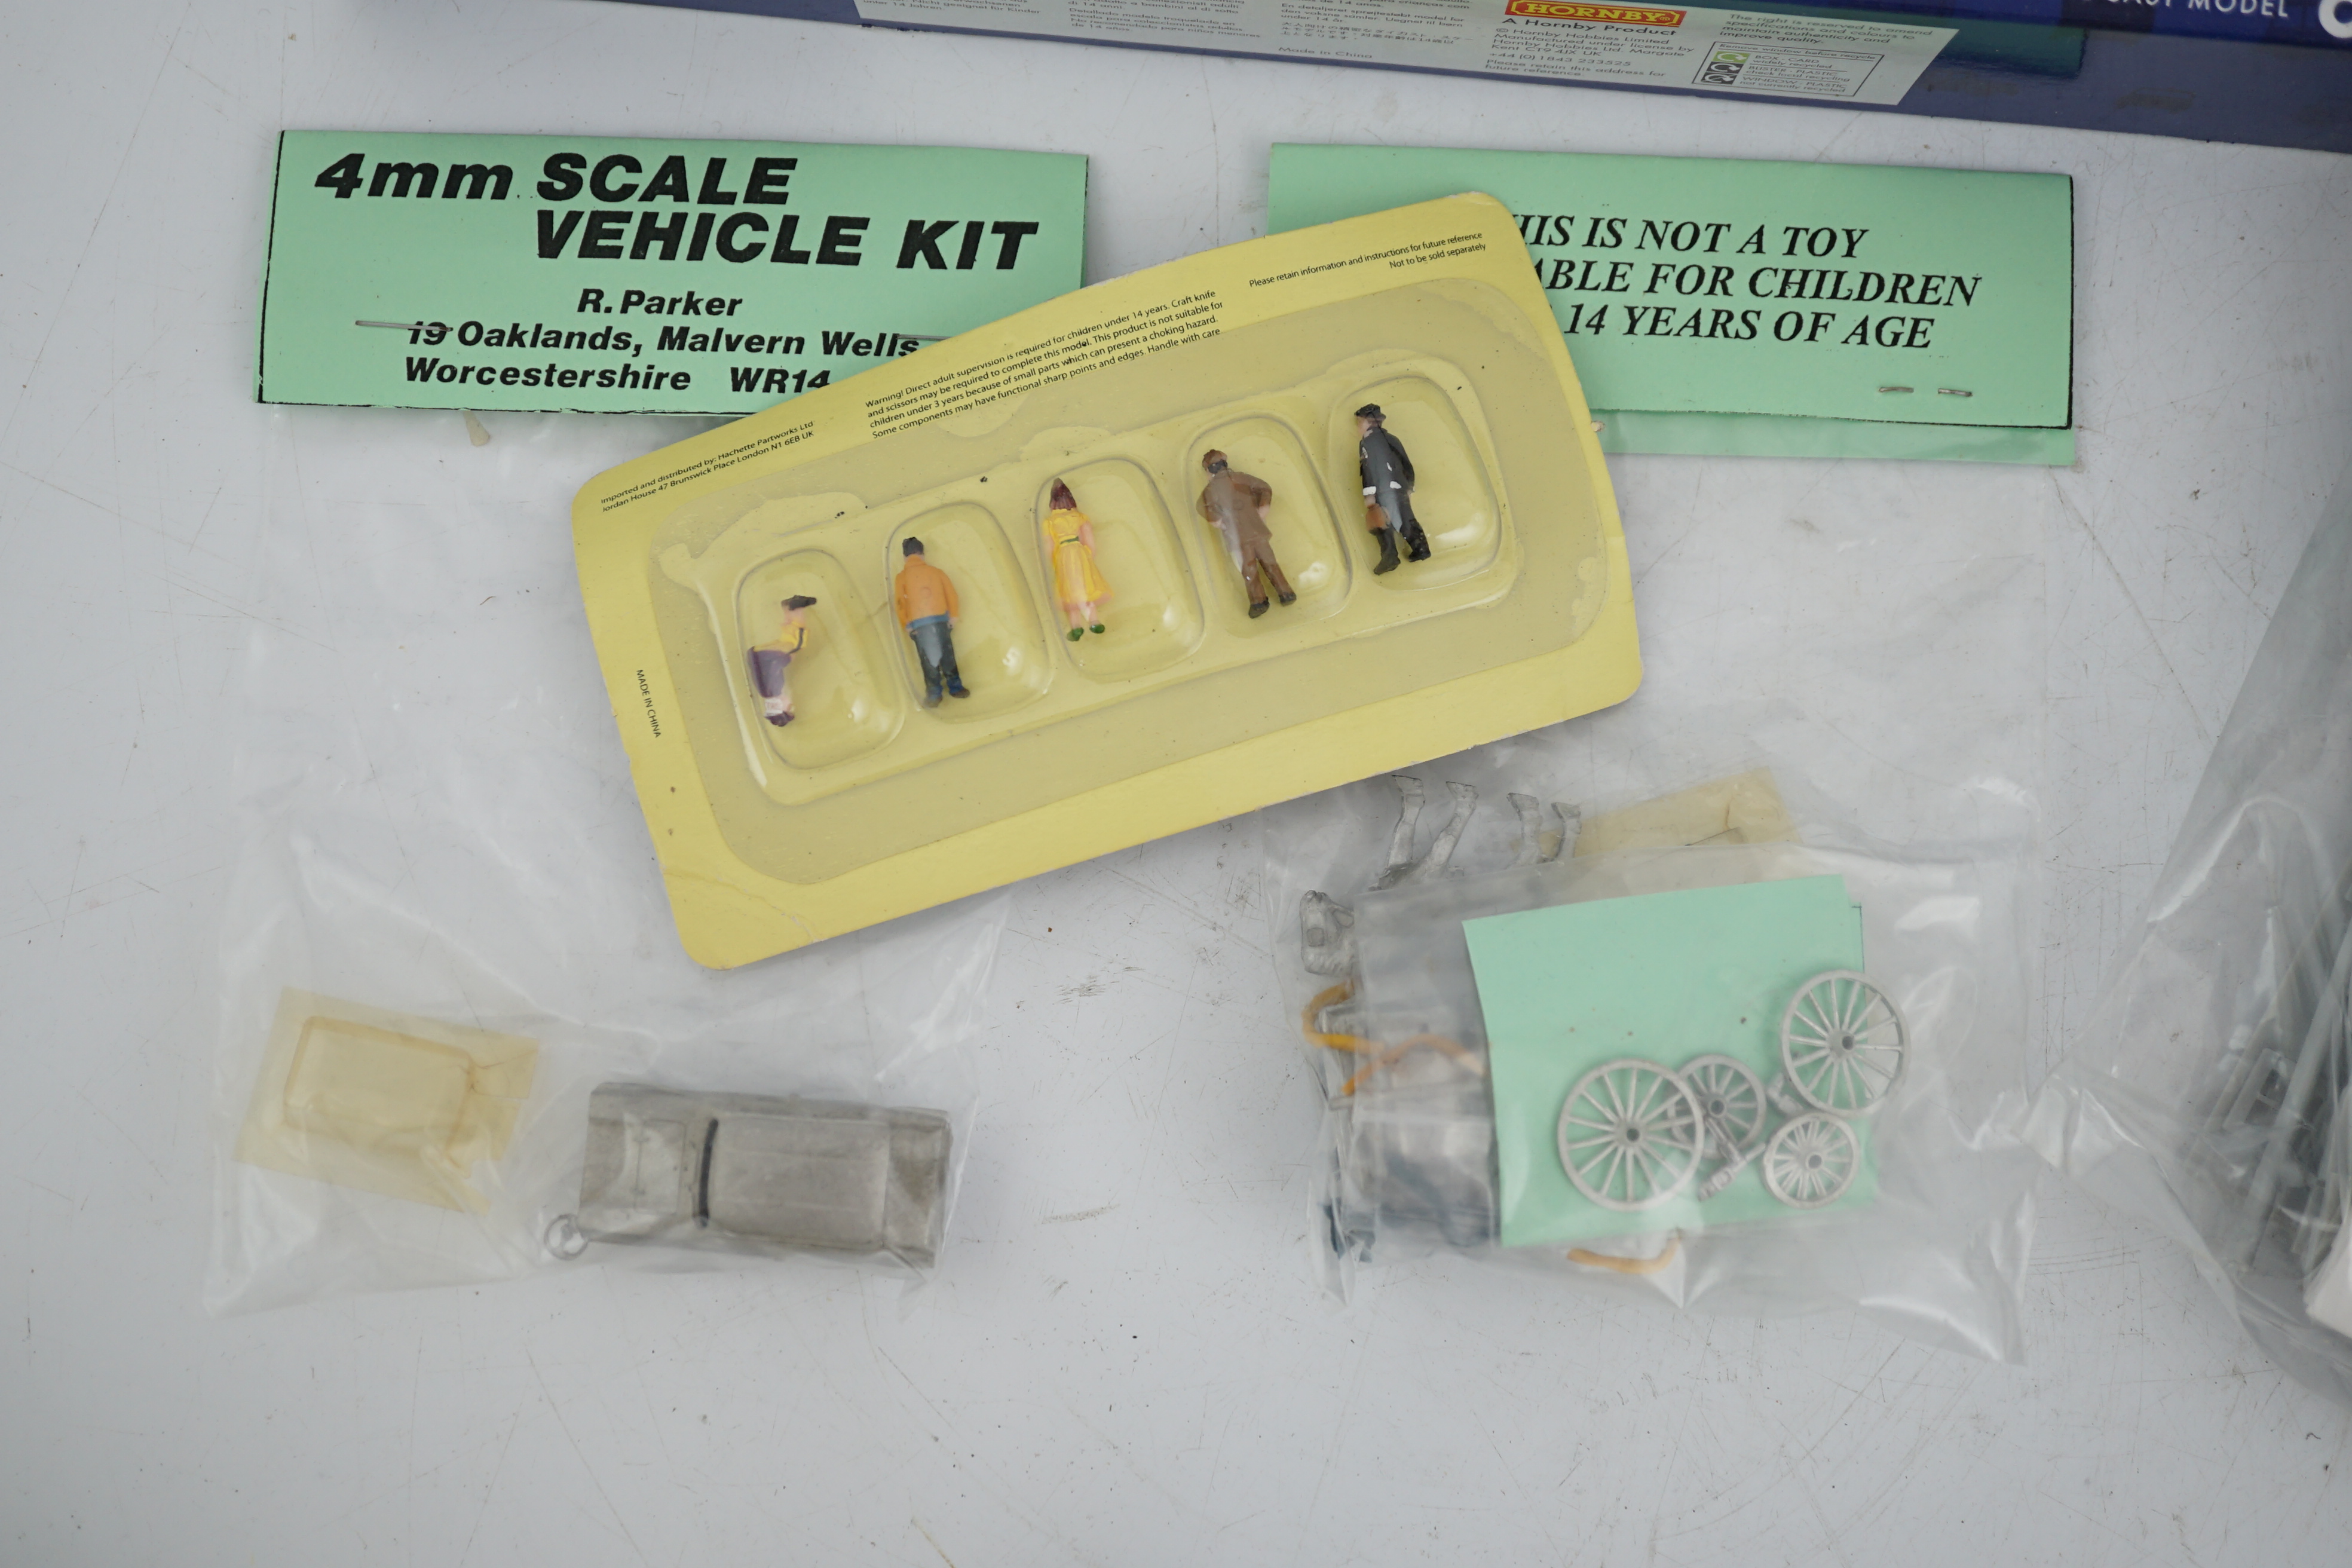 A collection of packeted white metal and plastic 00 gauge model railway kits by Dapol, 4mm Scale Vehicle kits R. Parker, etc. including diesel cranes, AEC lorries, LBSCR Stroudley 4-wheel coaches, trackside vehicles, etc